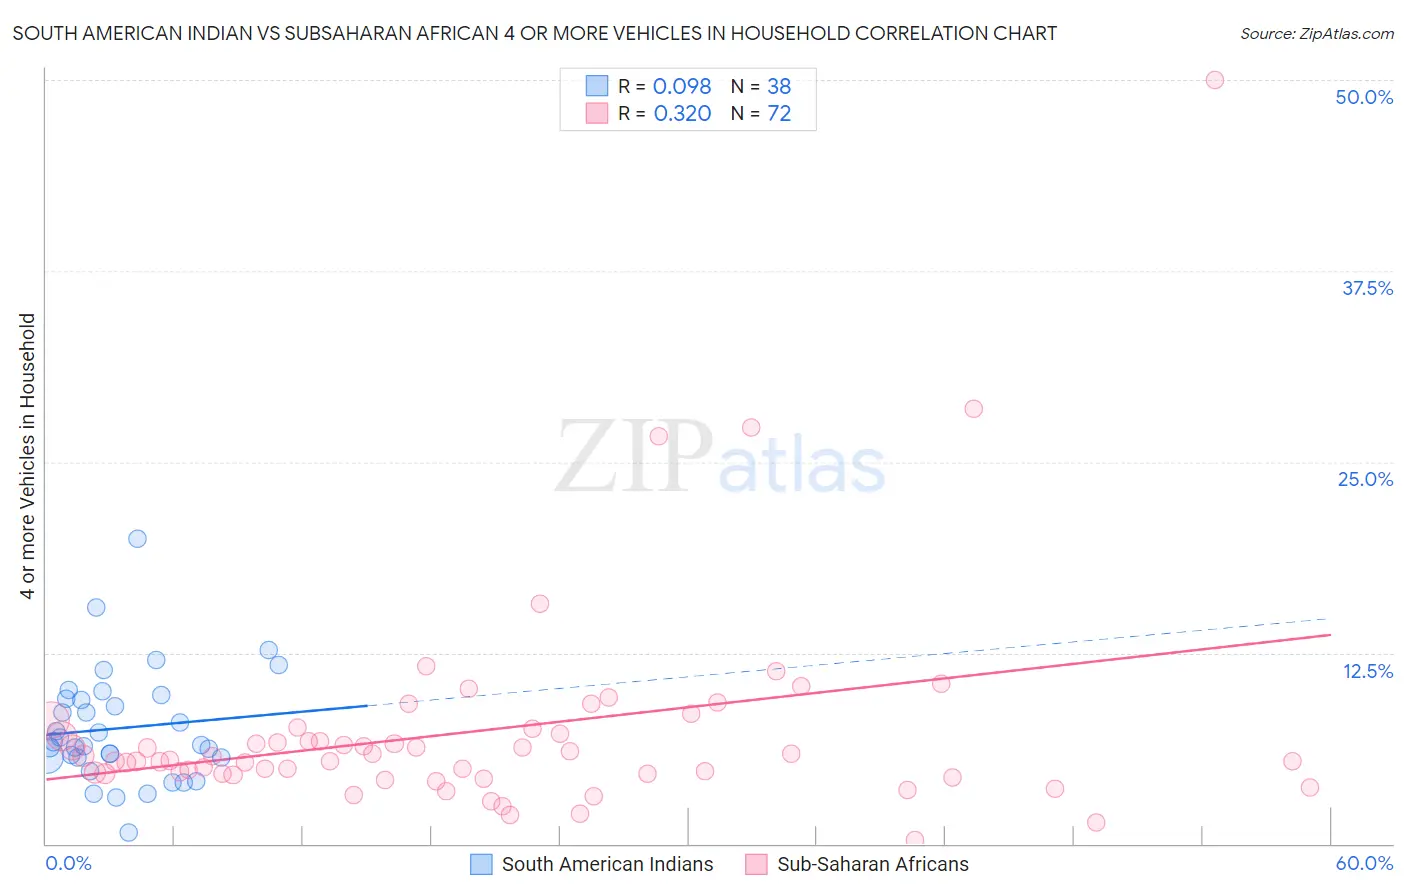 South American Indian vs Subsaharan African 4 or more Vehicles in Household